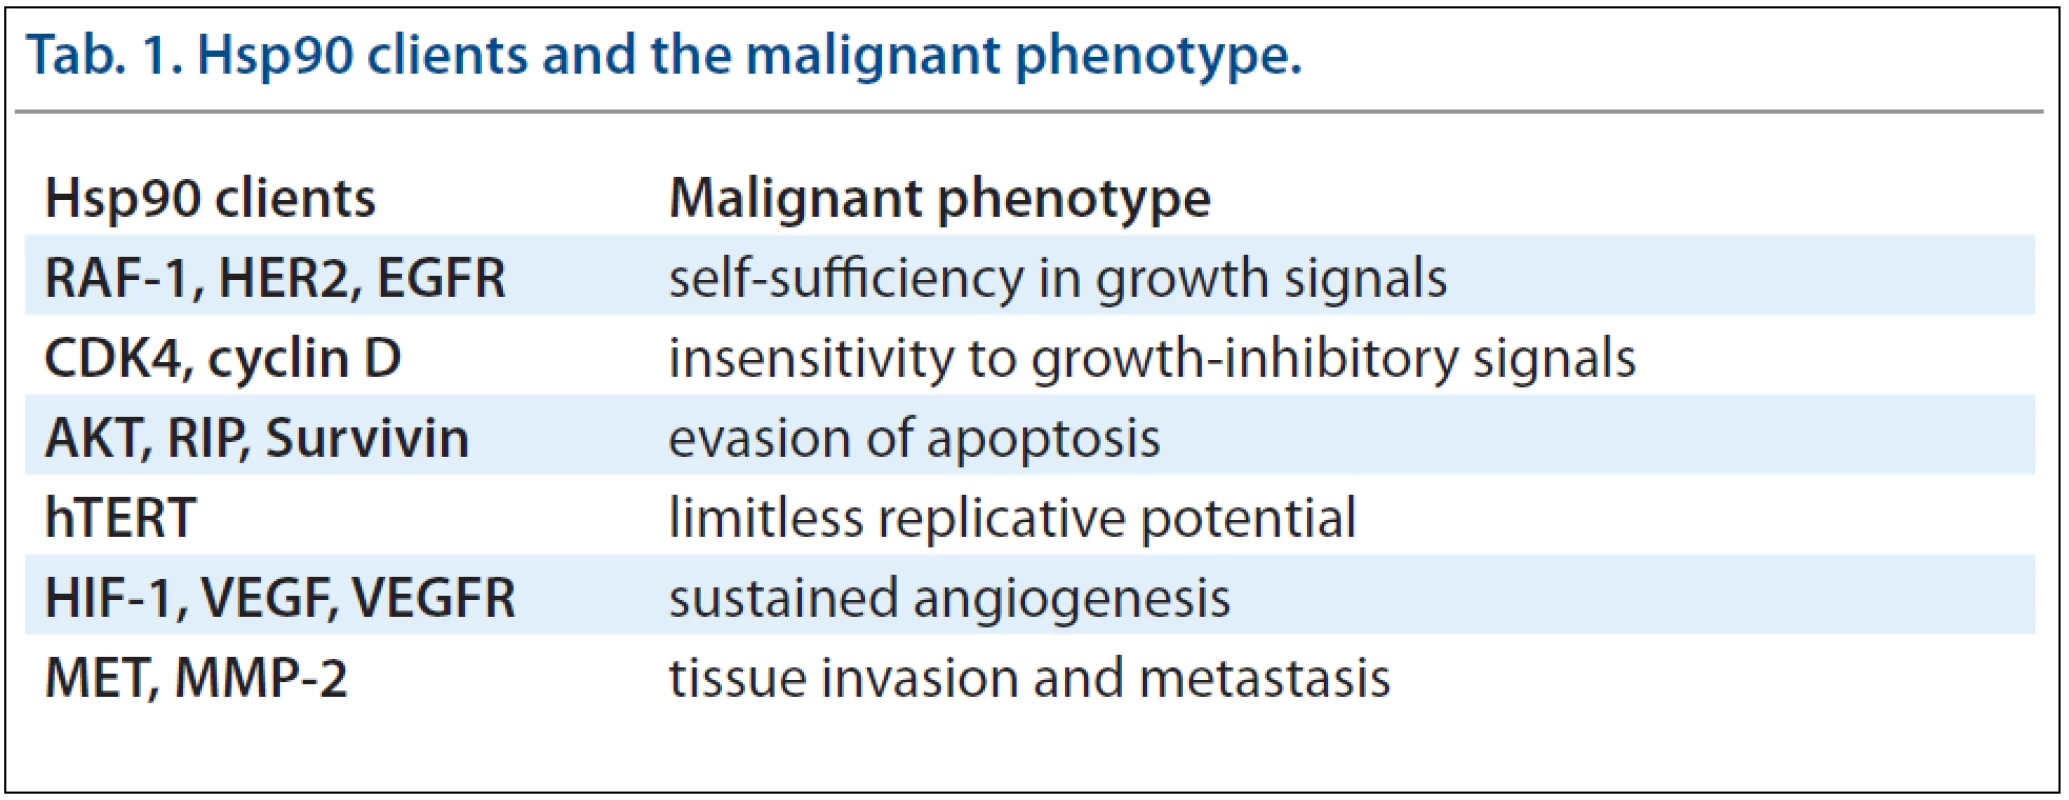 Hsp90 clients and the malignant phenotype.